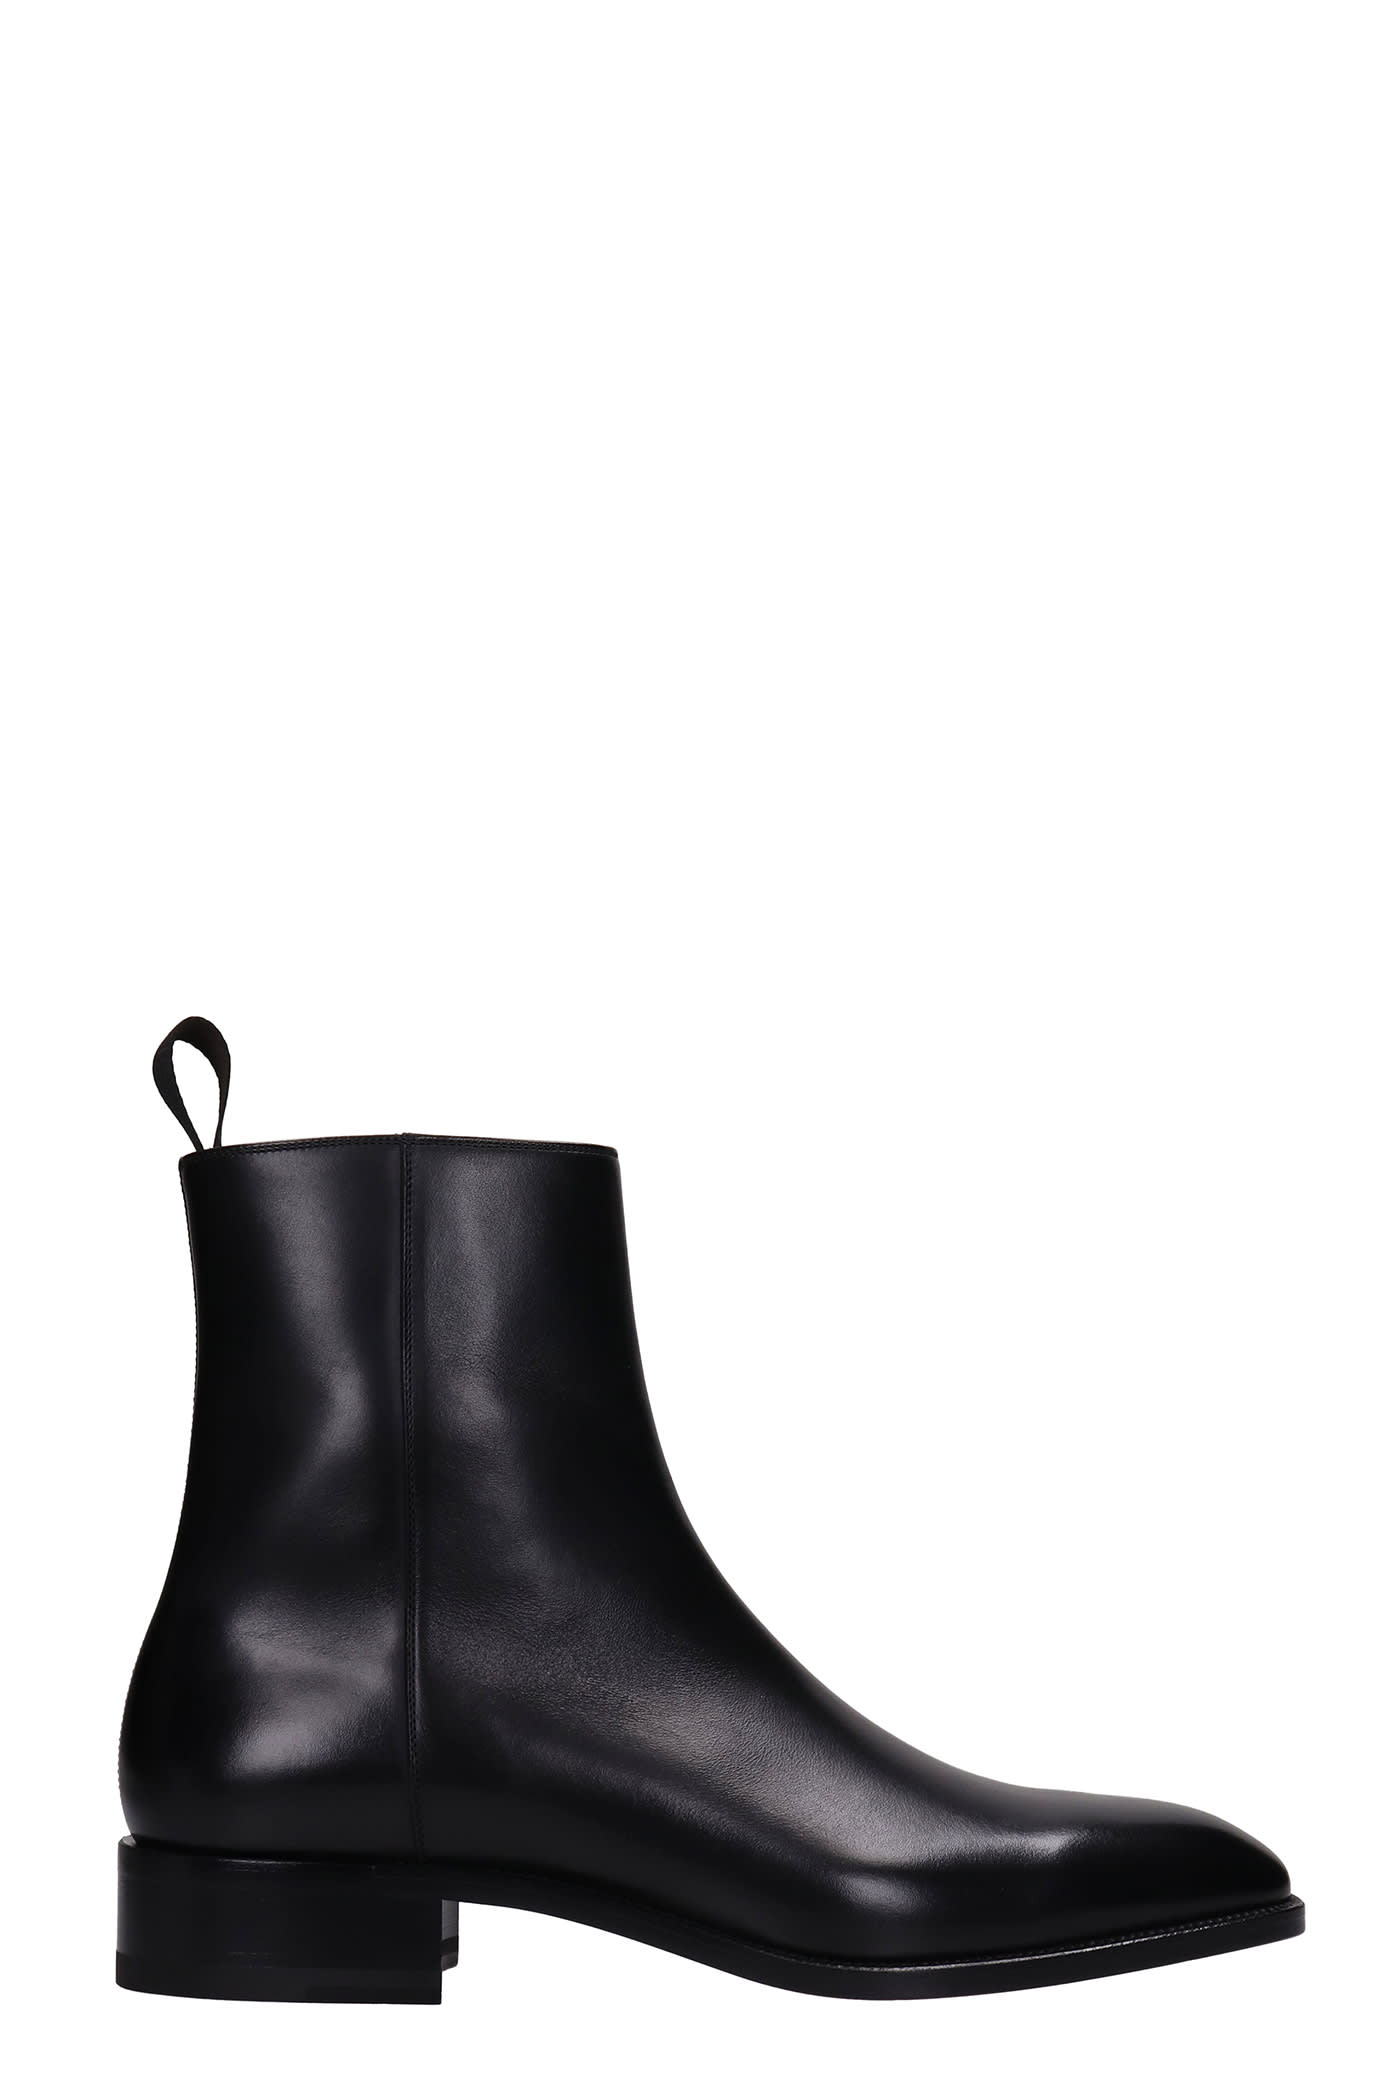 Christian Louboutin Goliatito Ankle Boots In Black Leather